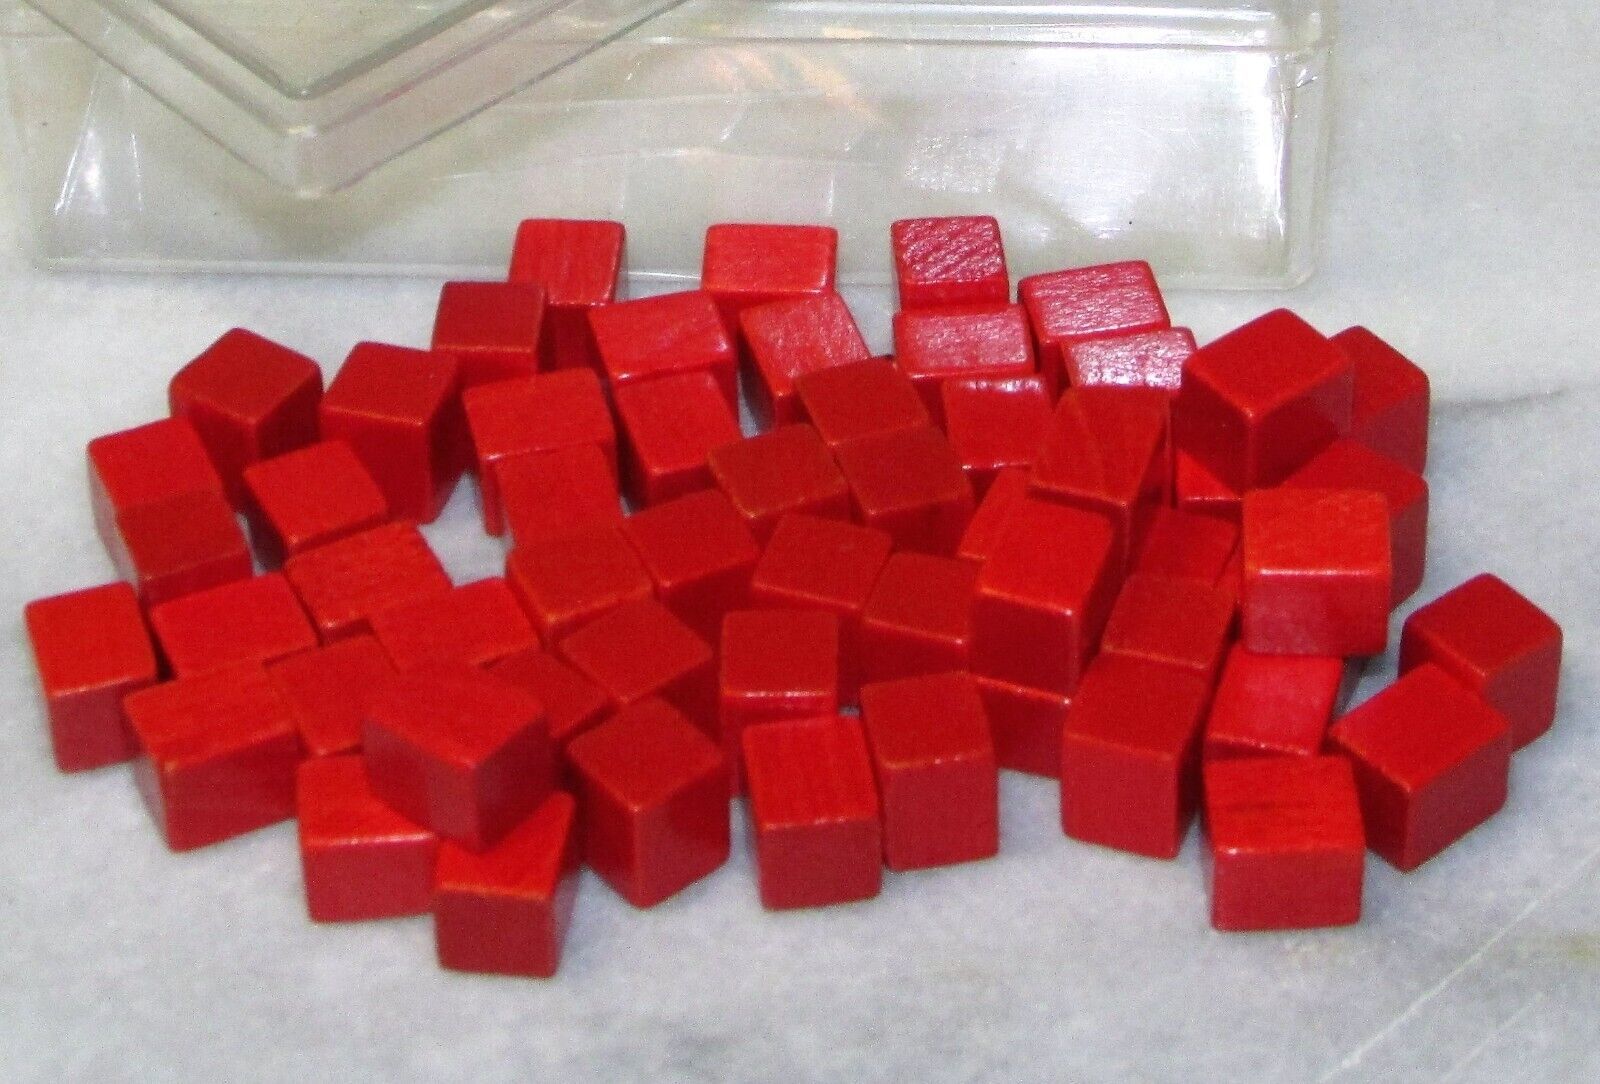 1959 RISK GAME PIECES WOODEN RED ARMY WITH ORIGINAL CLEAR PLASTIC BOX w/COVER - £3.53 GBP